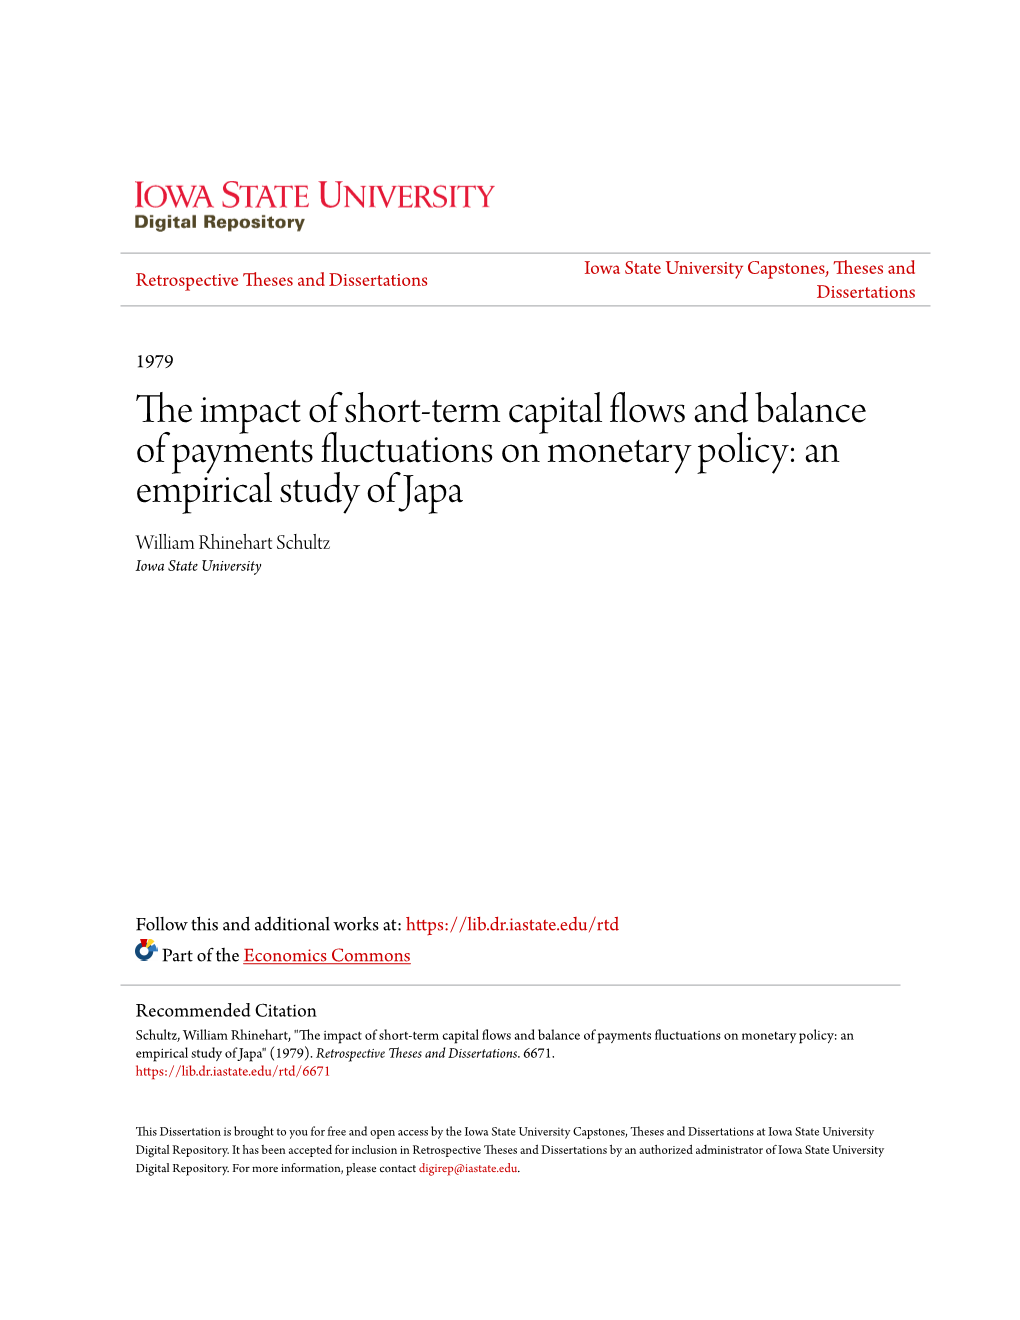 The Impact of Short-Term Capital Flows and Balance of Payments